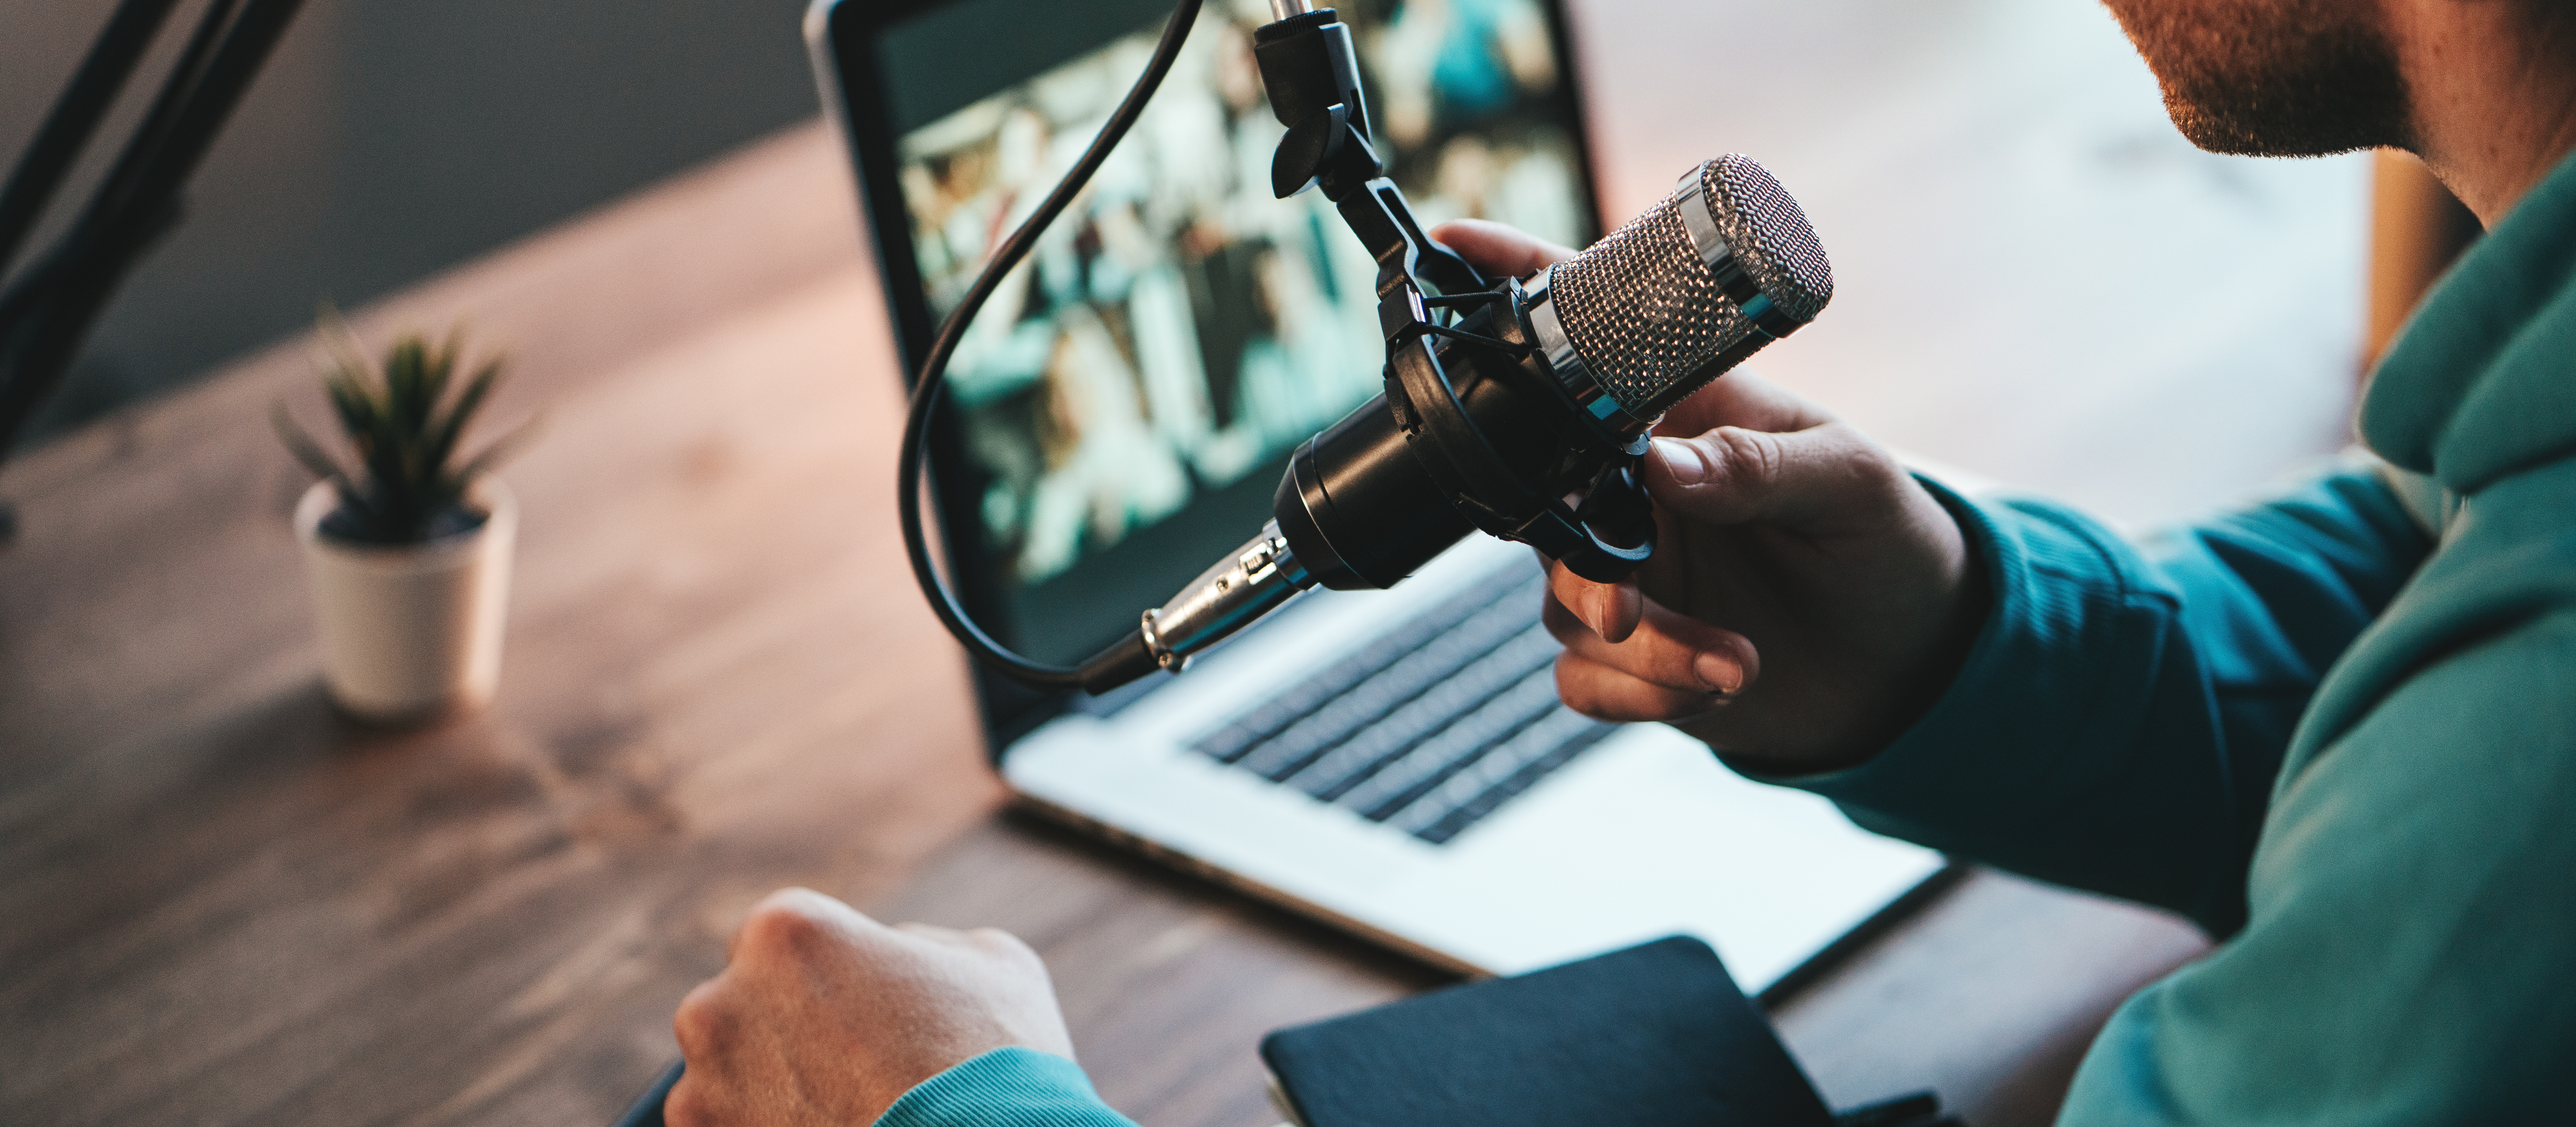 Man recording podcast on microphone